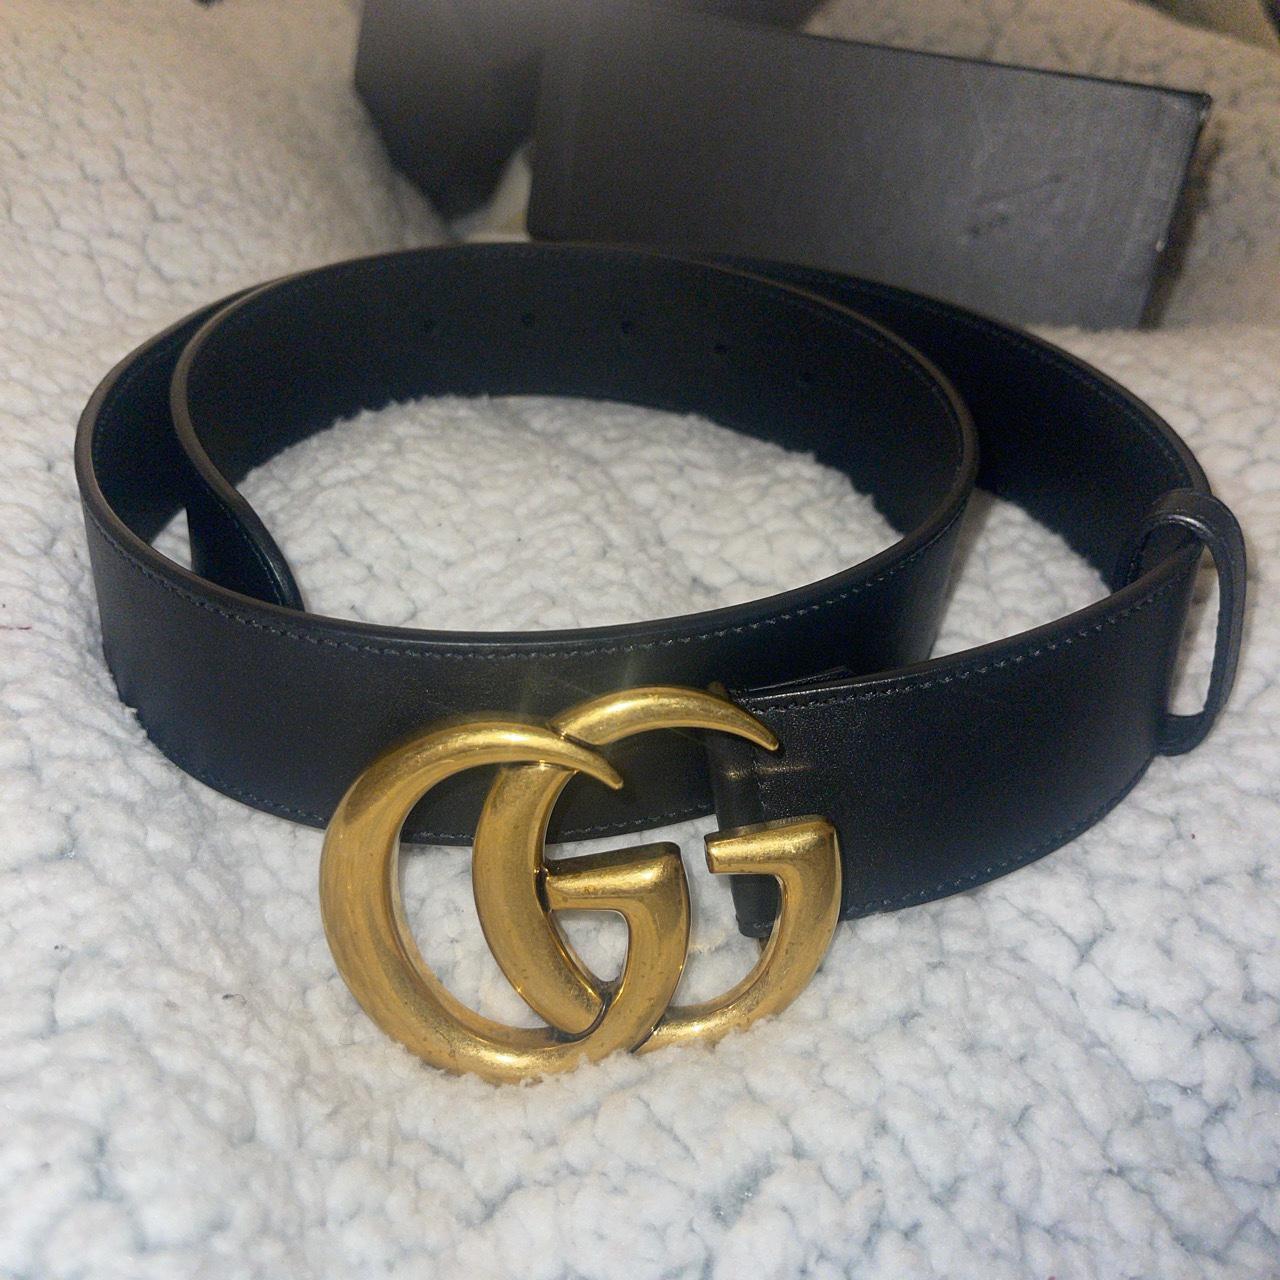 Gucci Women's Black and Gold Belt